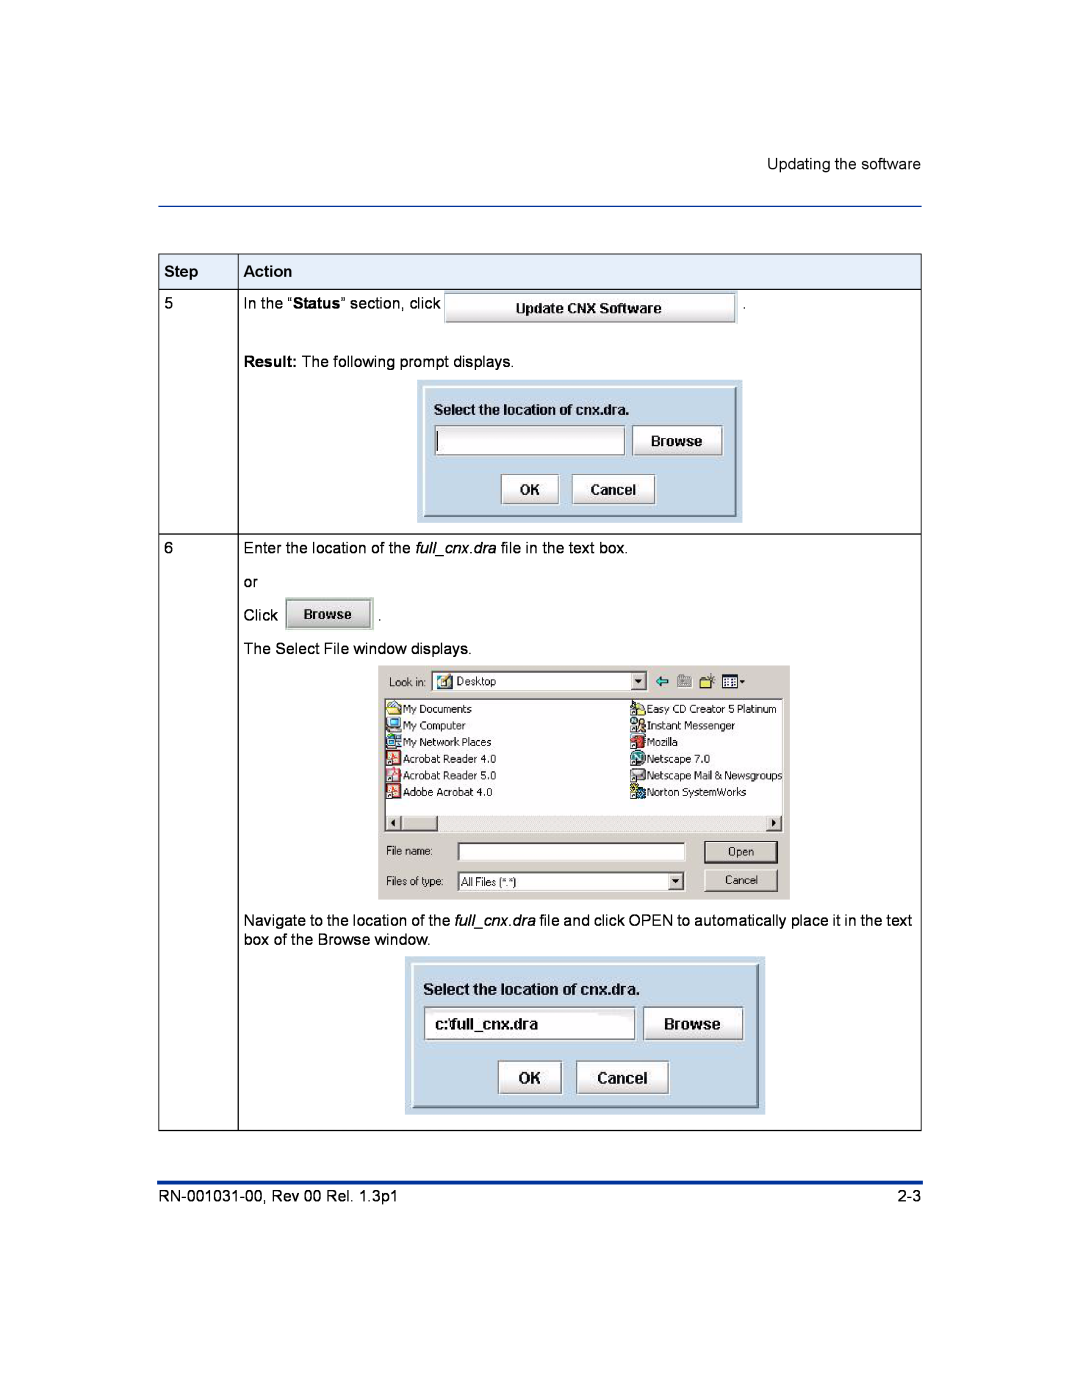 Aastra Telecom RN-001031-00 manual Updating the software, Step, Action, The Select File window displays 